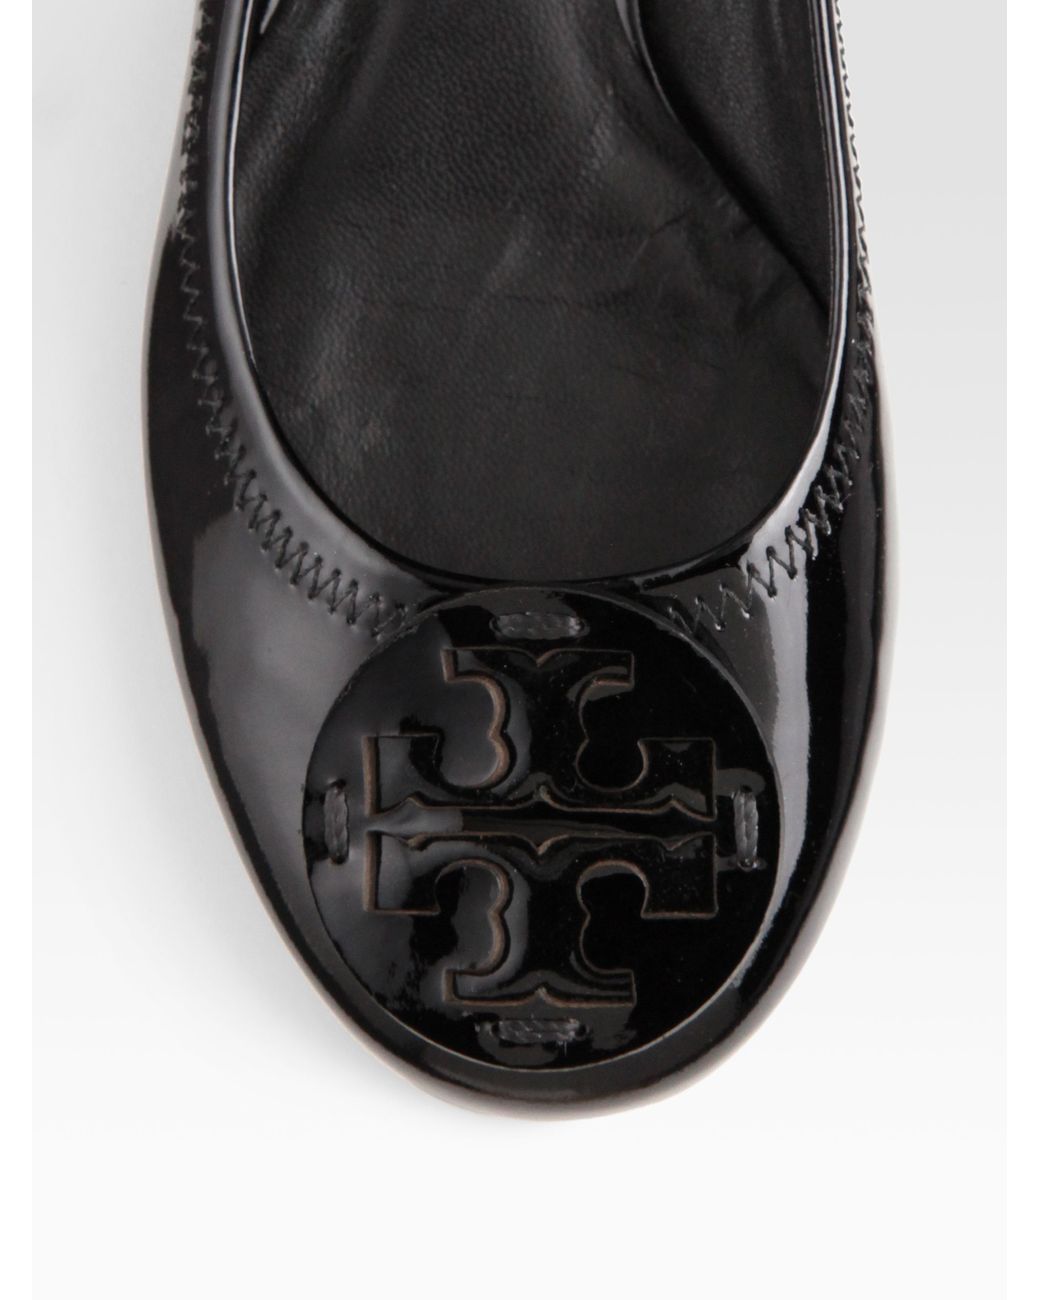 Tory Burch Reva Patent Leather Ballet Flats in Black | Lyst